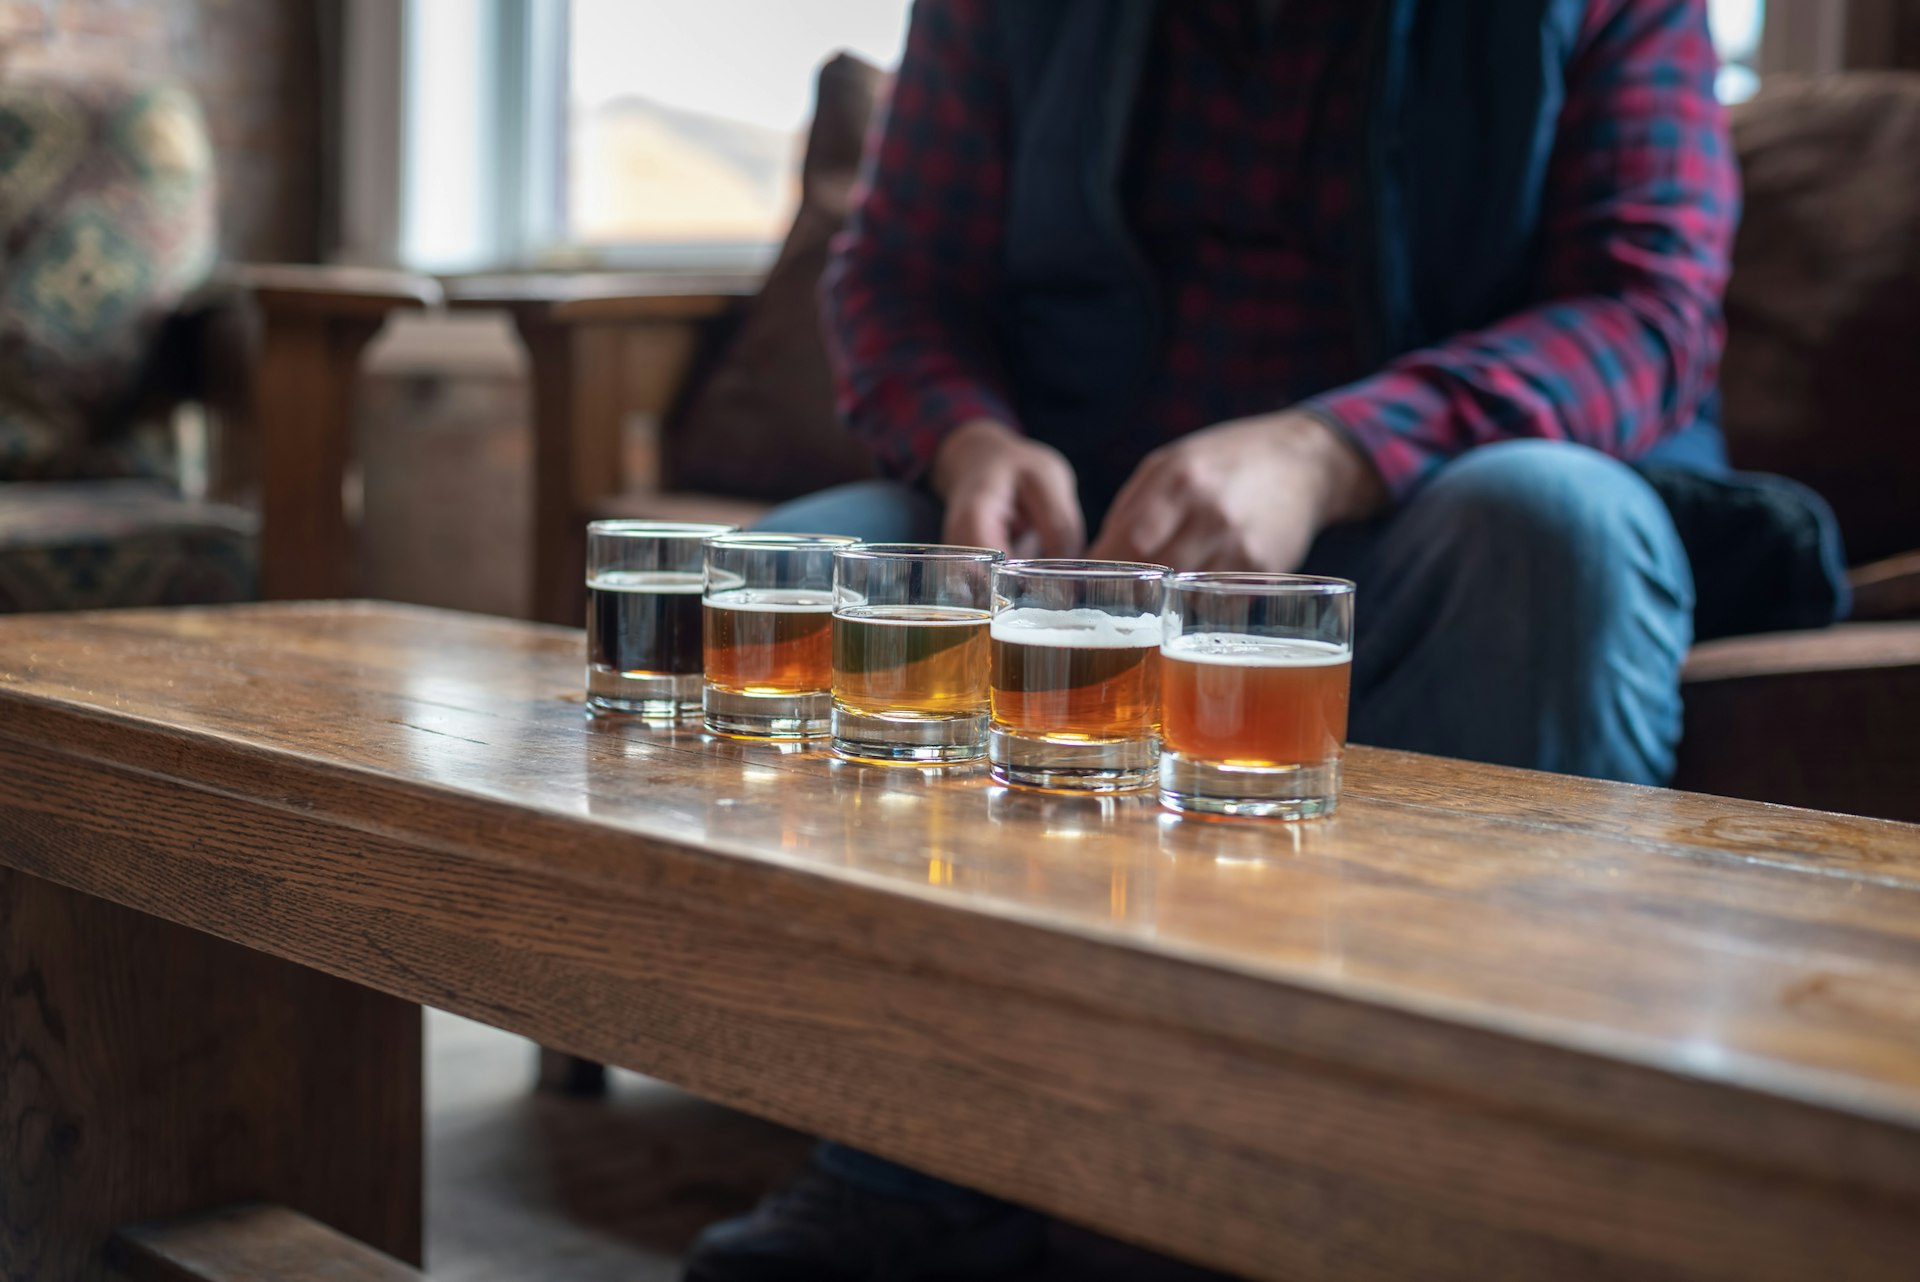 A man in a plaid top sits near a flight of beers in a microbrewery